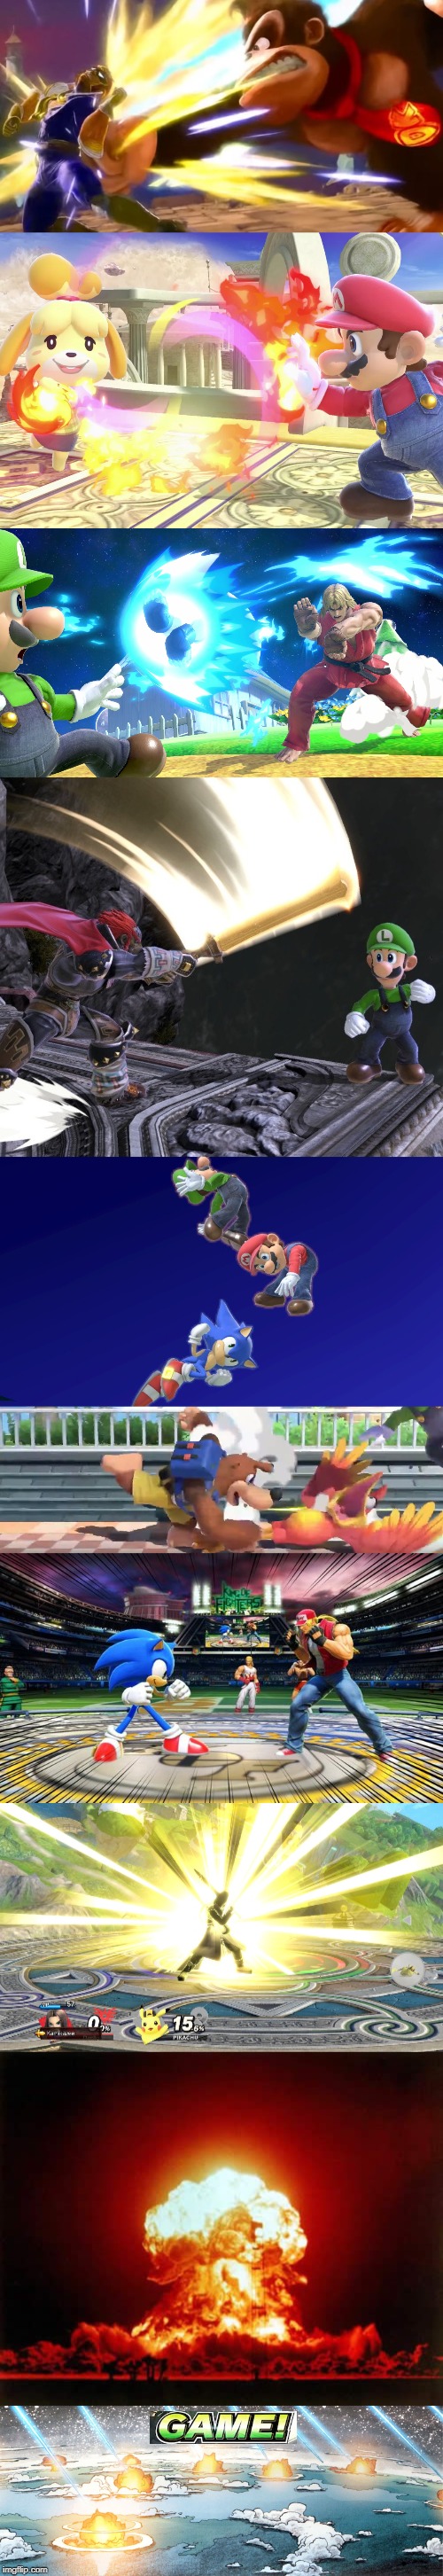 Guess who did it? | image tagged in sonic beating up the mario bros,isabelle catches mario's fireballs,luigi,doryah,dk vs captain falcon,sonic vs terry | made w/ Imgflip meme maker